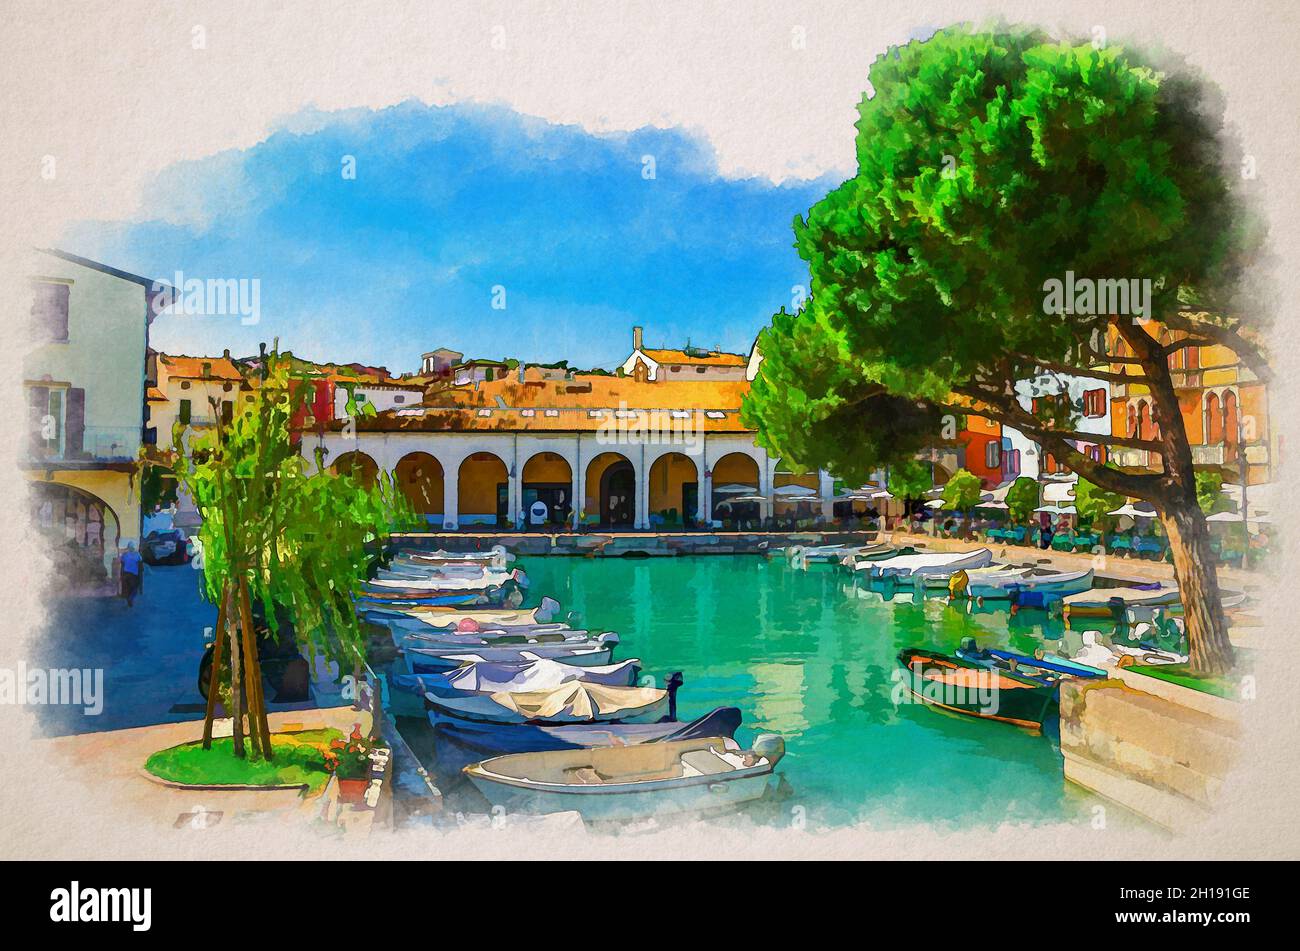 Watercolor drawing of Desenzano del Garda Old harbour with boats on turquoise water, green trees, street restaurants and traditional buildings in hist Stock Photo